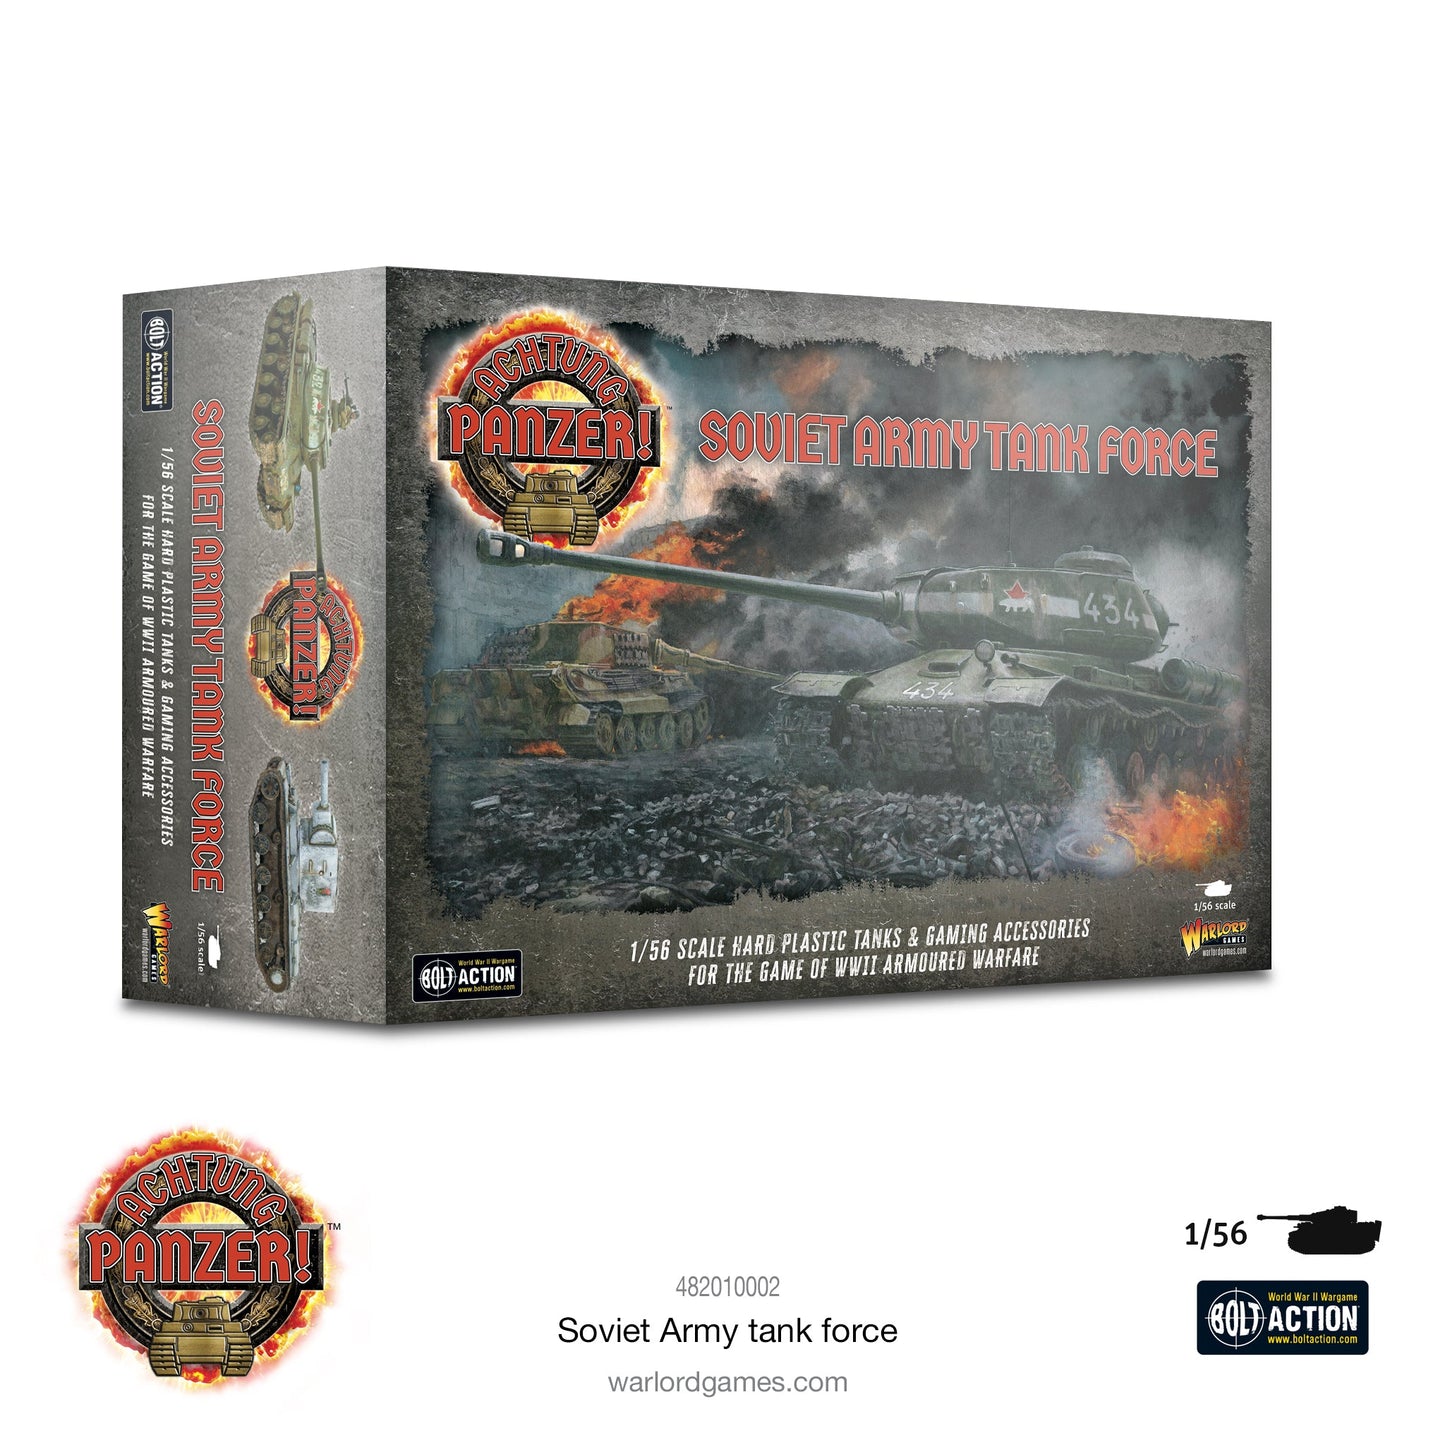 Achtung Panzer! Soviet Army tank force - Mighty Melee Games